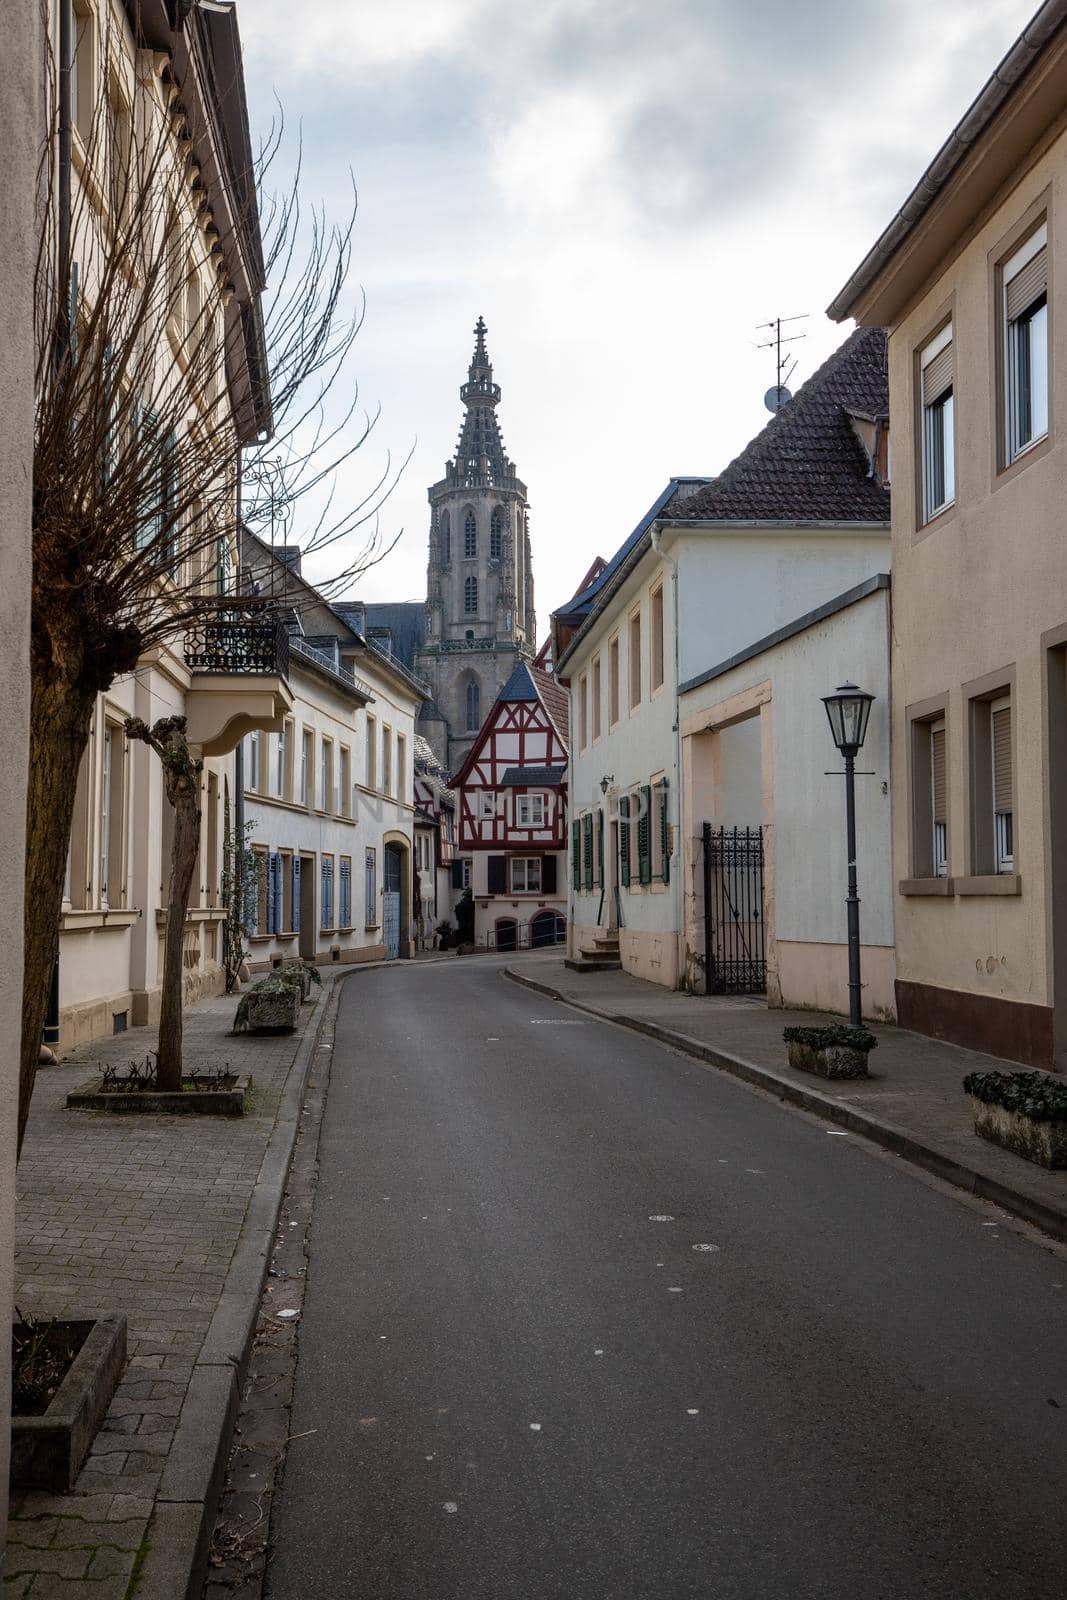 Cobbled road with historic houses and Schlosskirche in Meisenheim by reinerc